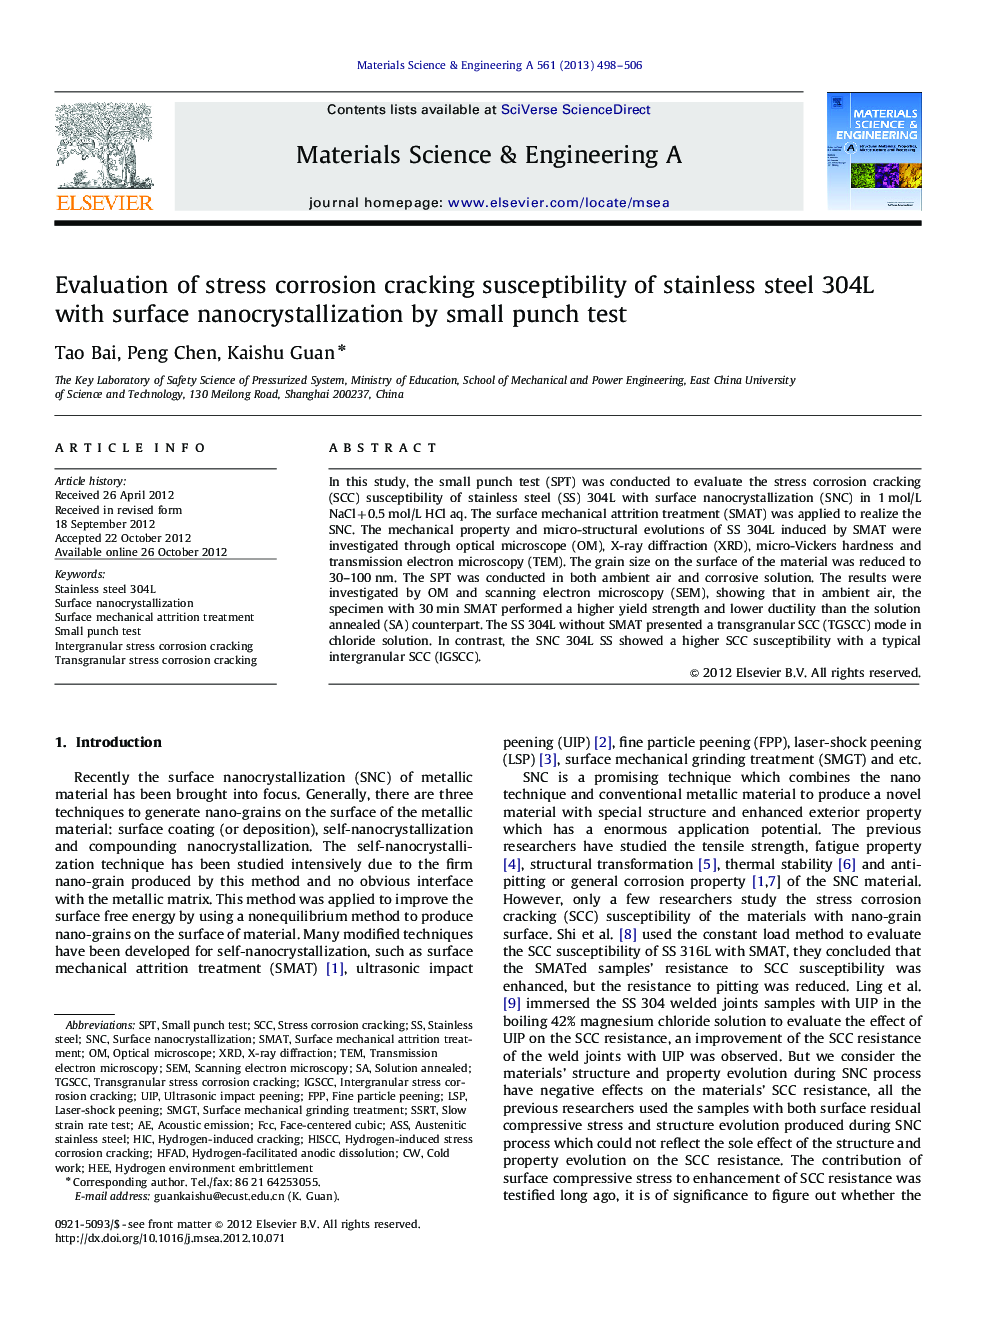 Evaluation of stress corrosion cracking susceptibility of stainless steel 304L with surface nanocrystallization by small punch test